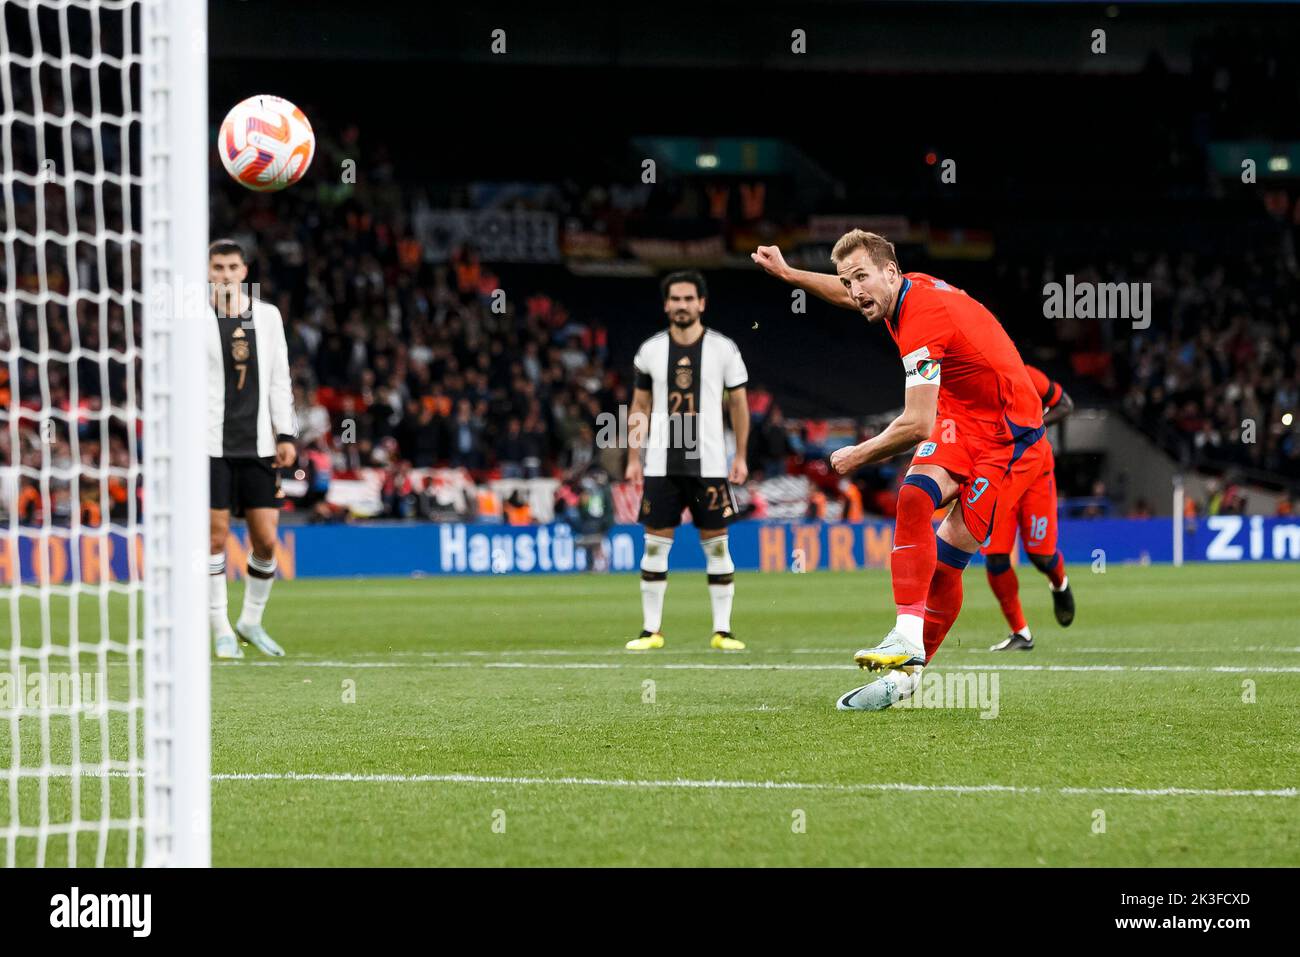 London, UK. 26th Sep, 2022. Harry Kane of England scores their third goal to make the score 3-2 during the UEFA Nations League Group C match between England and Germany at Wembley Stadium on September 26th 2022 in London, England. (Photo by Daniel Chesterton/phcimages.com) Credit: PHC Images/Alamy Live News Stock Photo